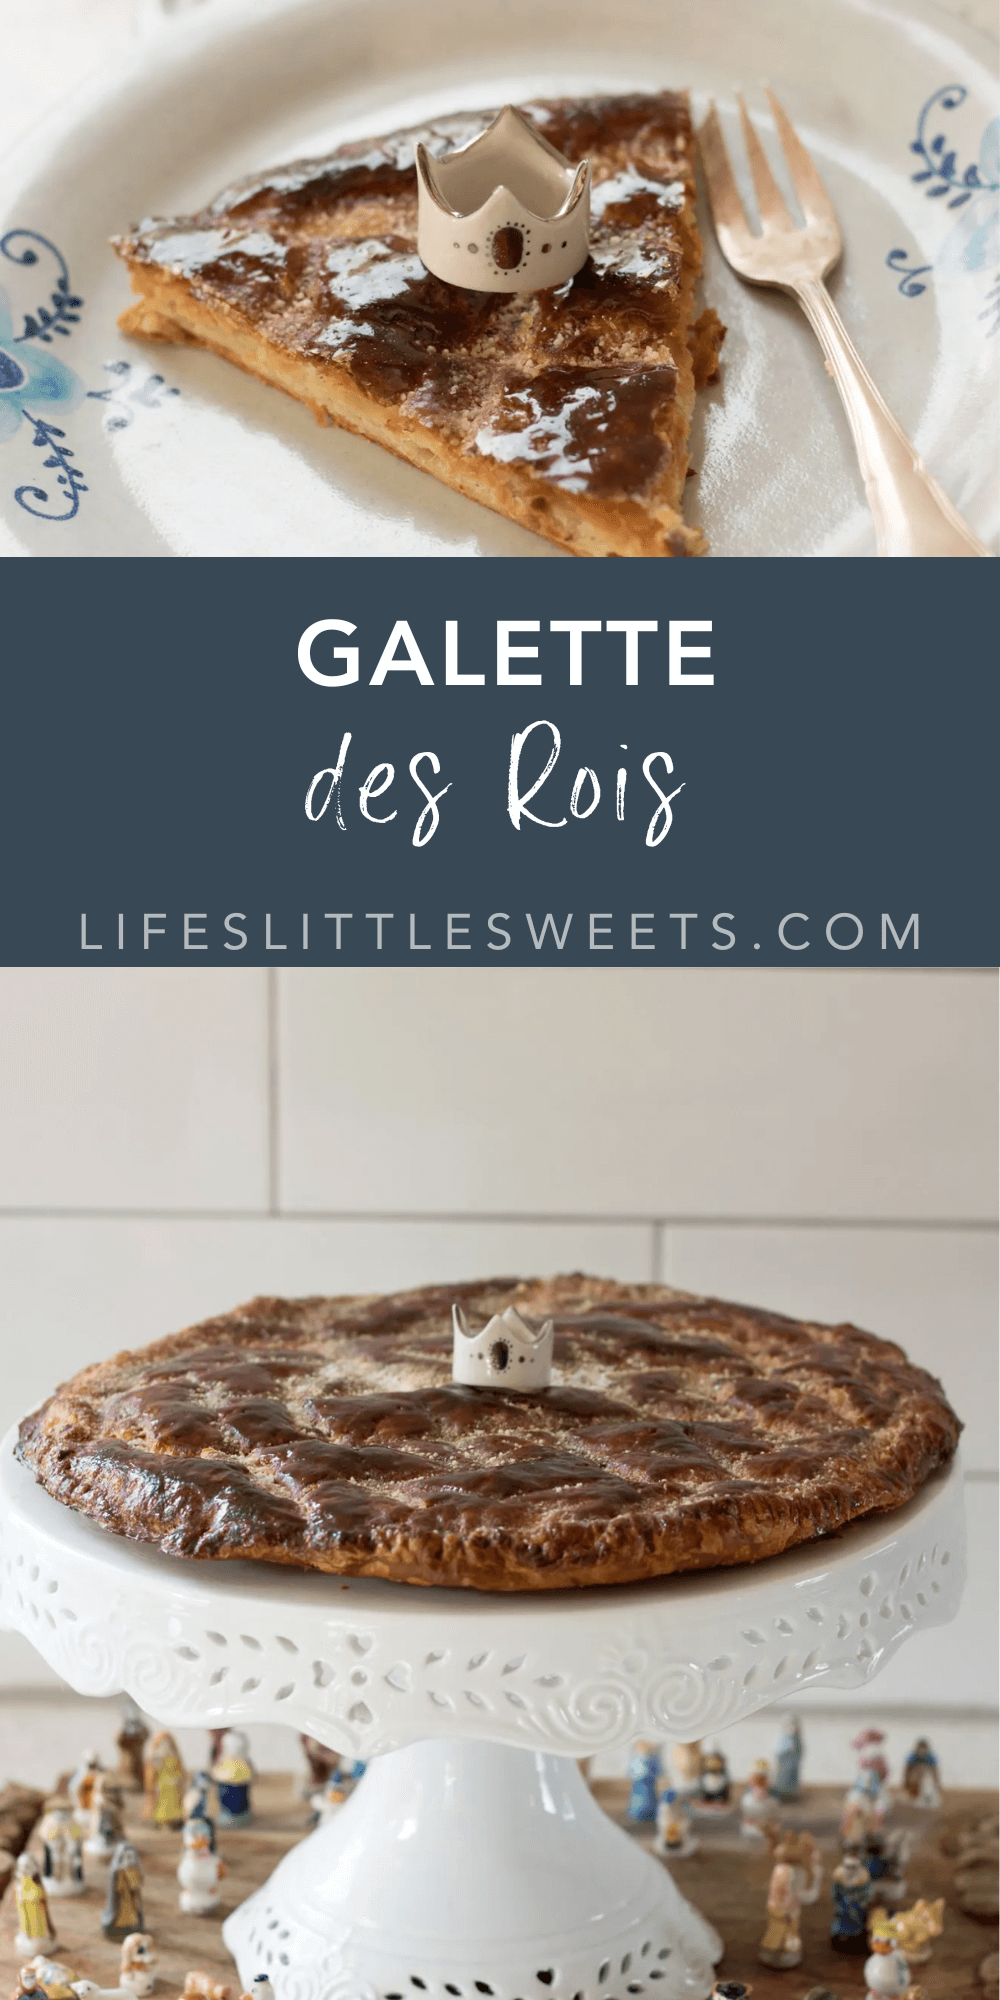 Galette Des Rois (King Cake) with text overlay